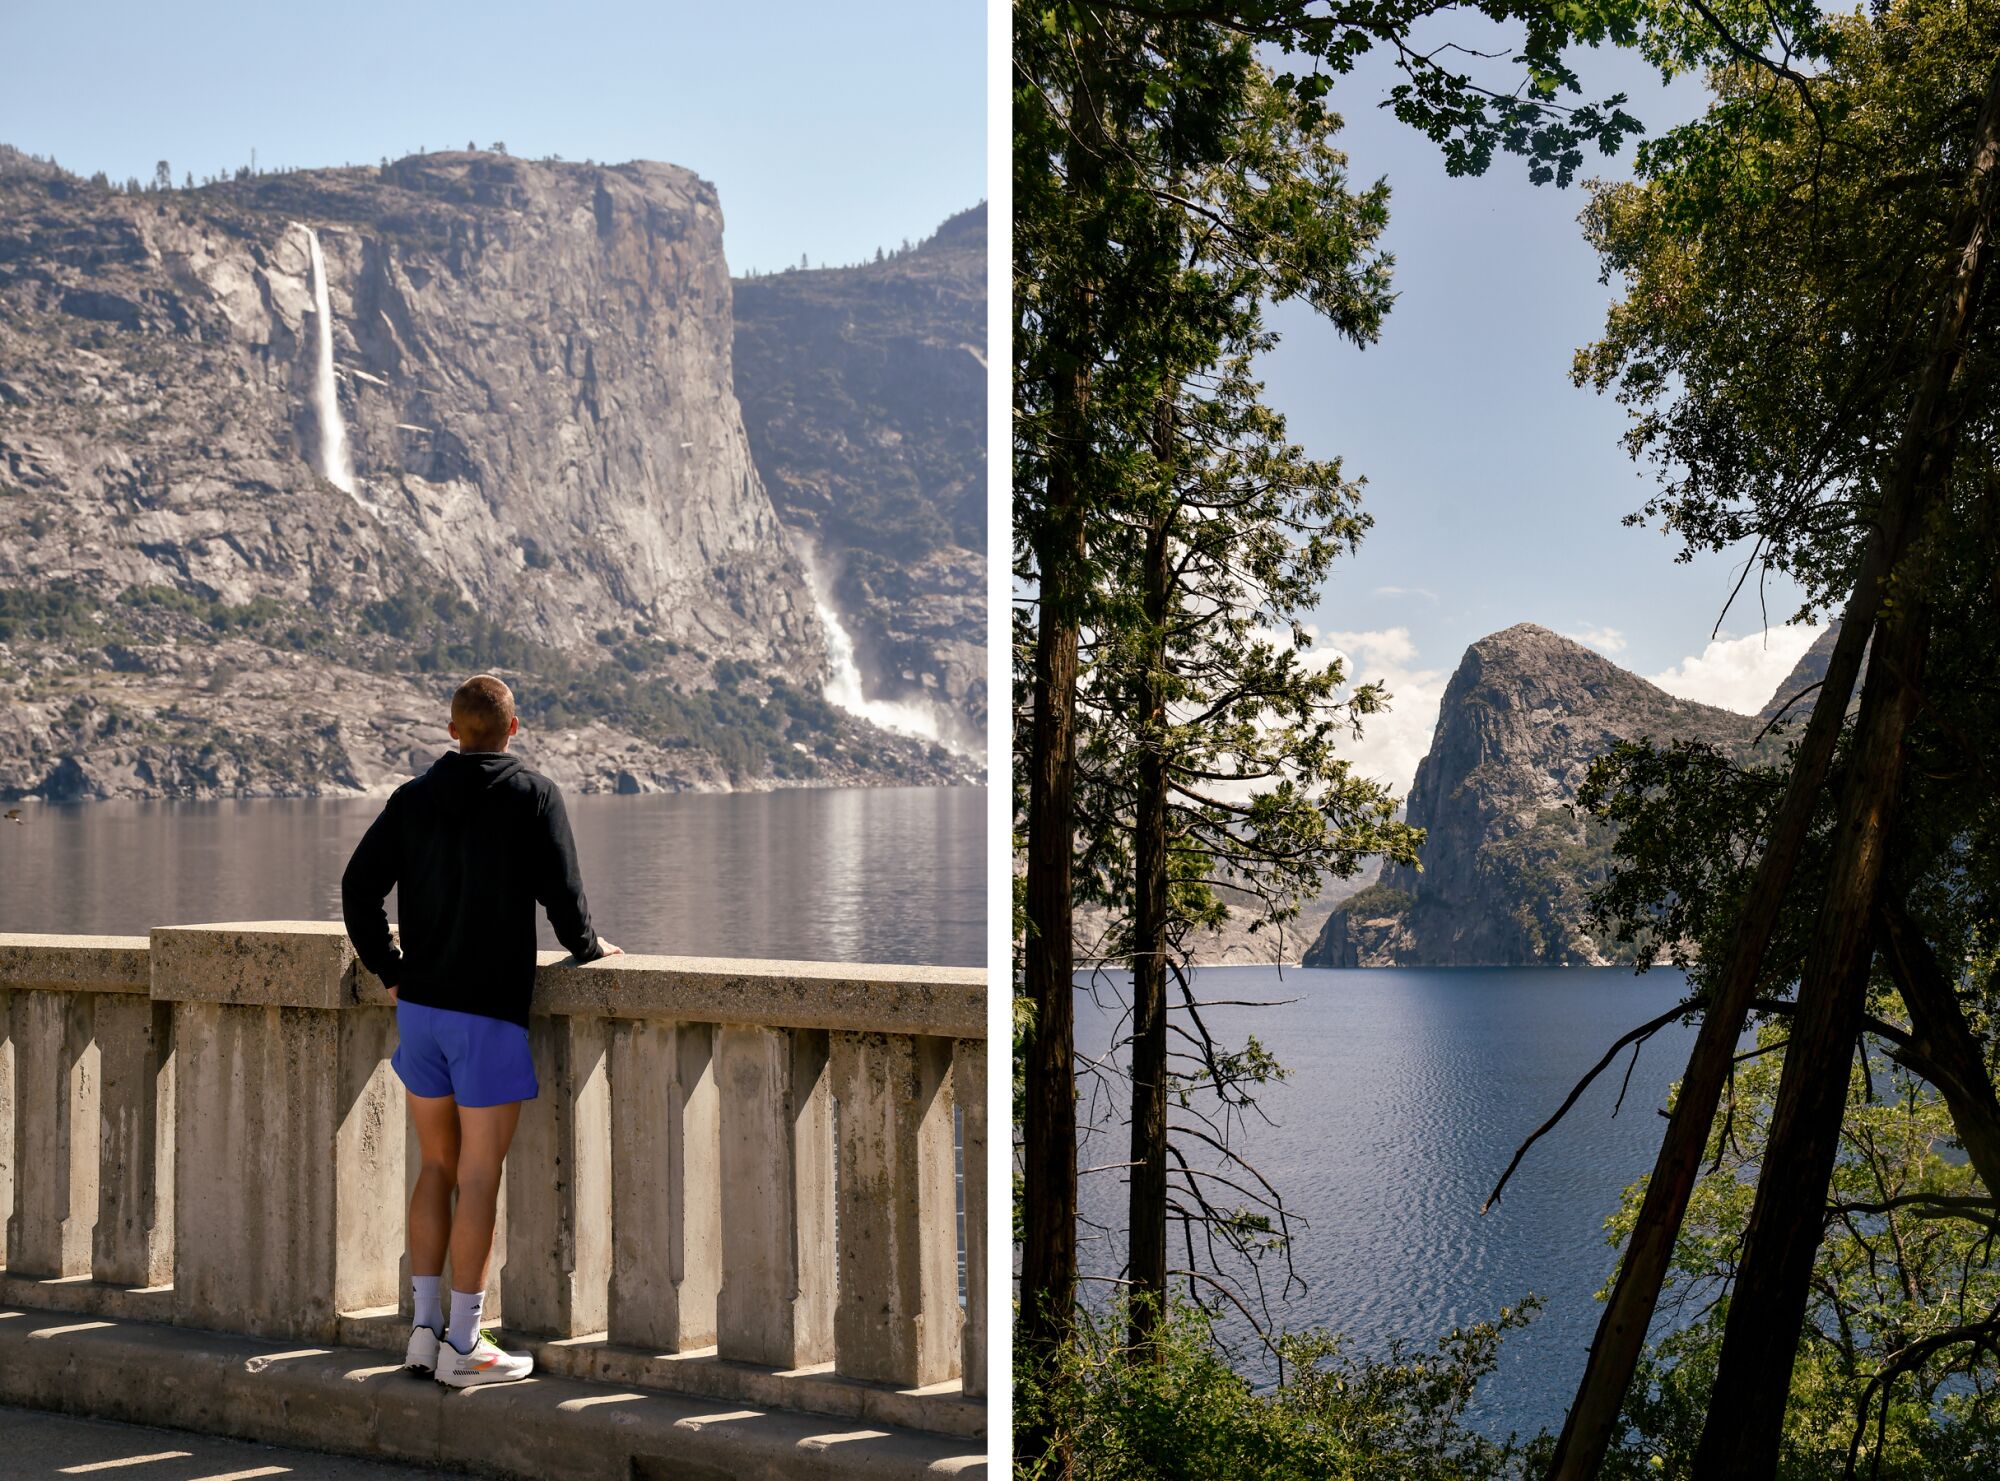 Two photos side by side, showing different views of the Hetch Hetchy Valley's reservoir.